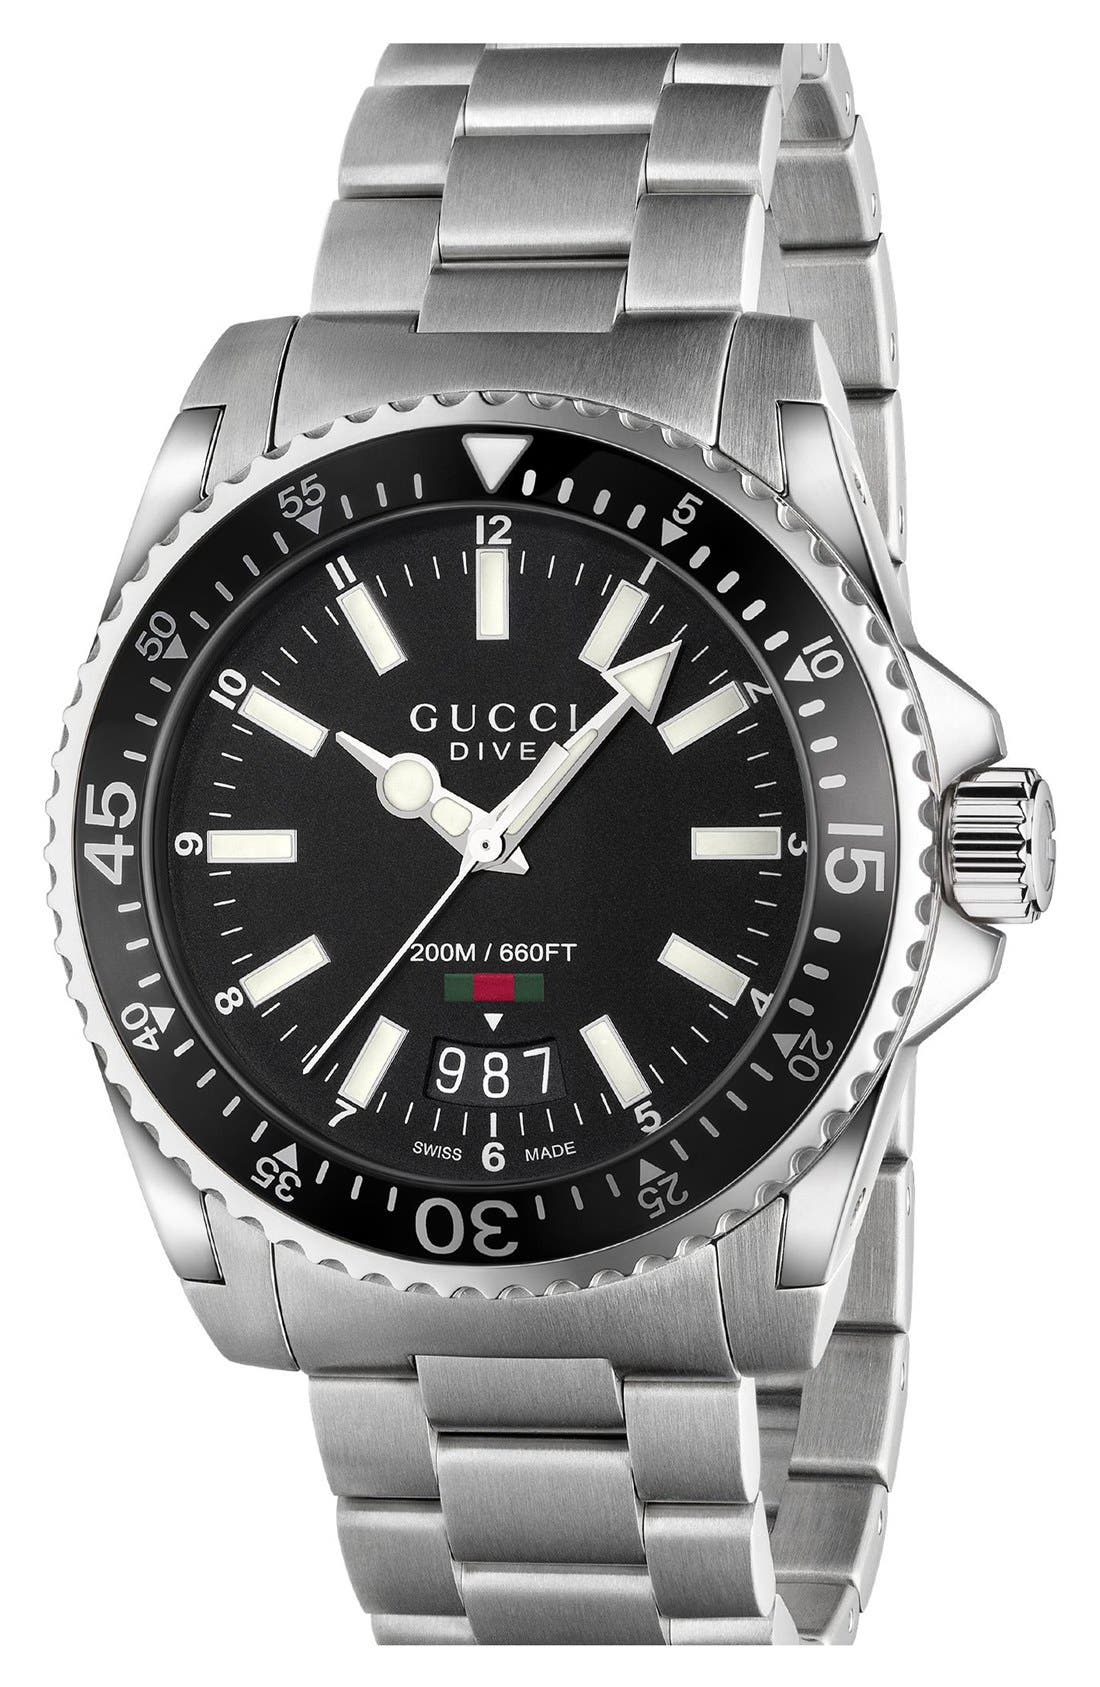 gucci dive watch price